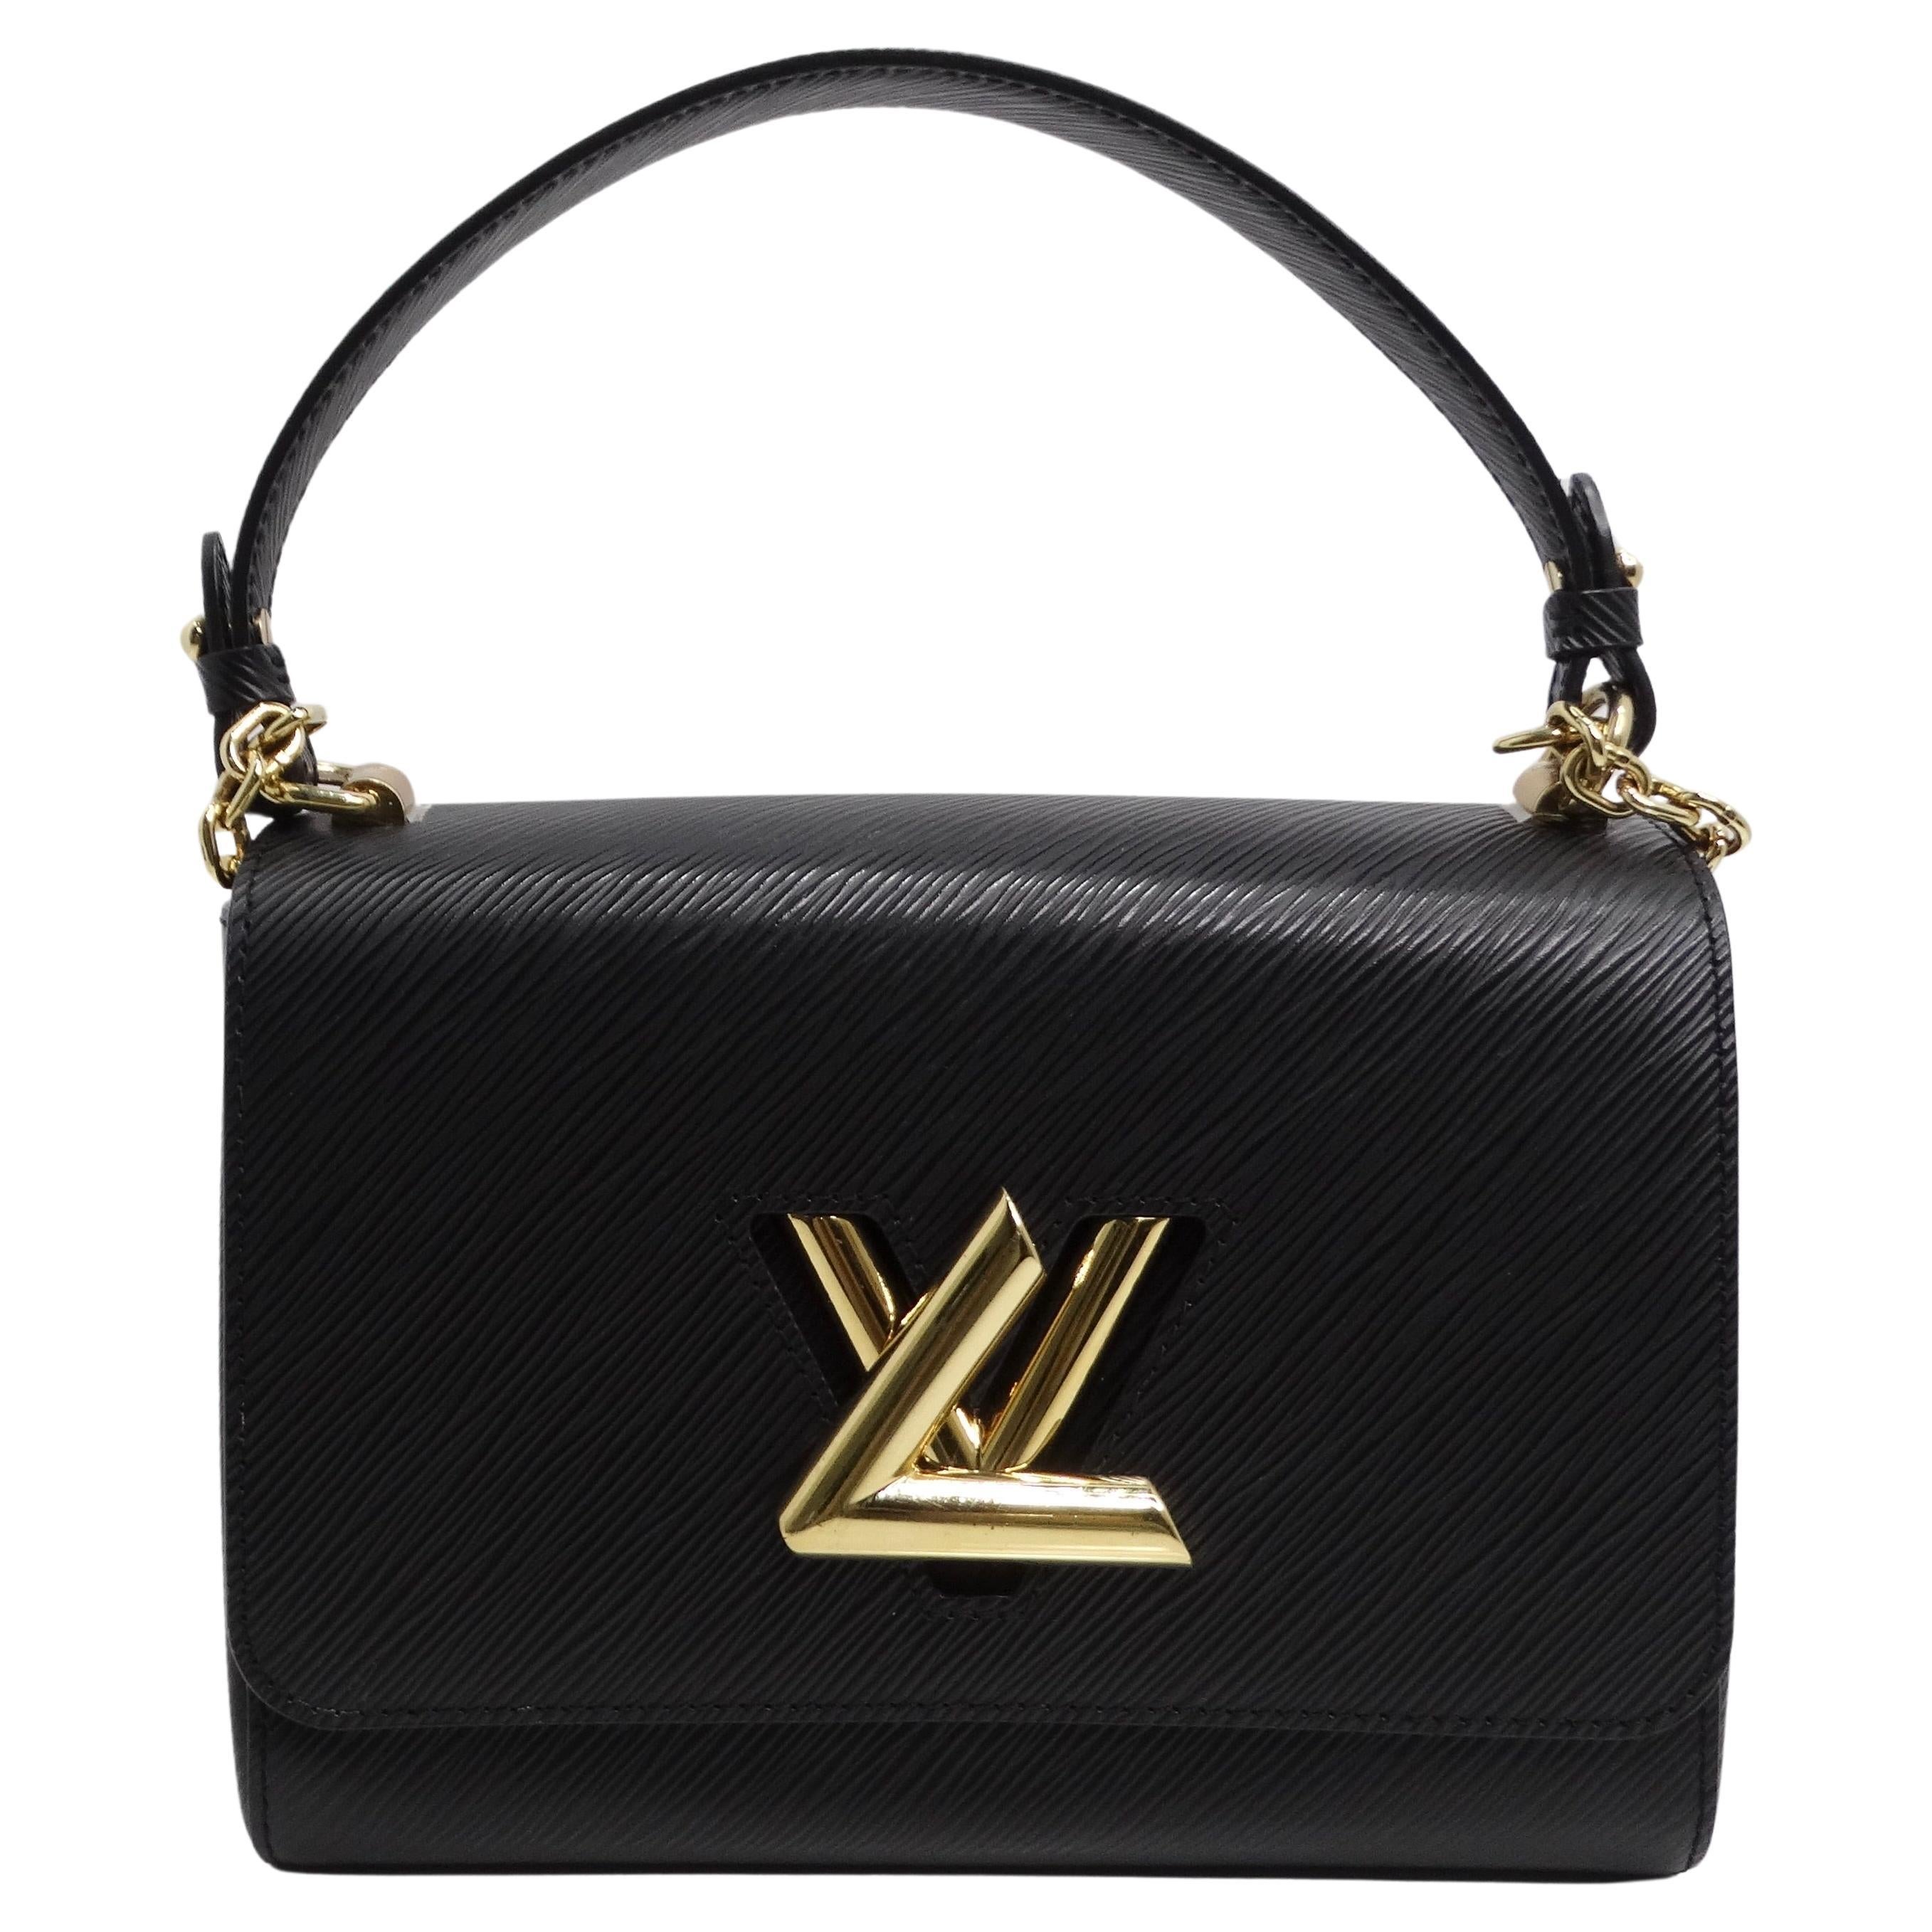 Where can I sell my Louis Vuitton bag?